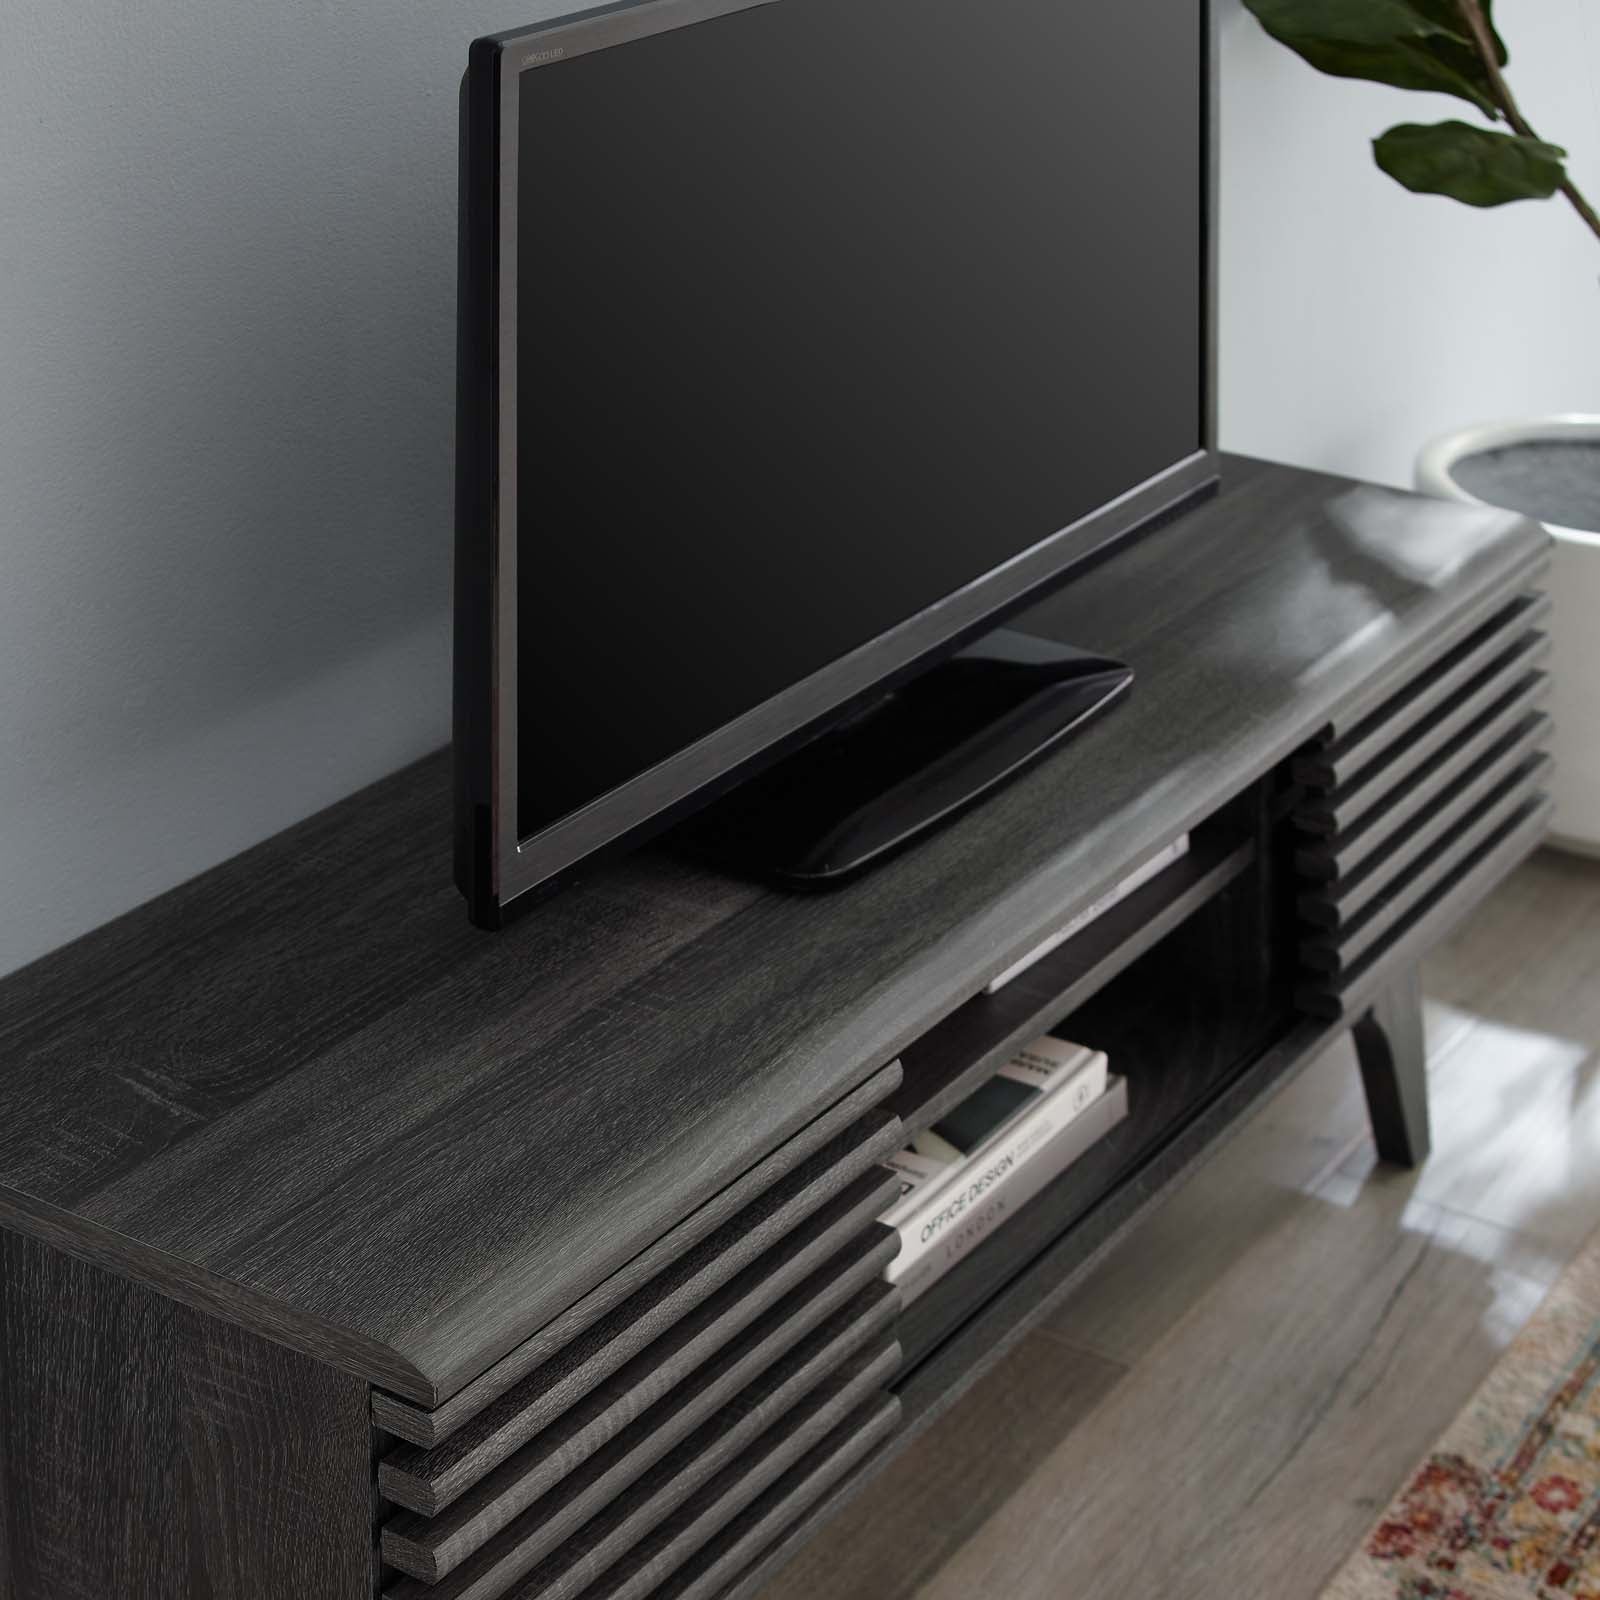 Modway TV & Media Units - Render-46"-Media-Console-TV-Stand-Charcoal